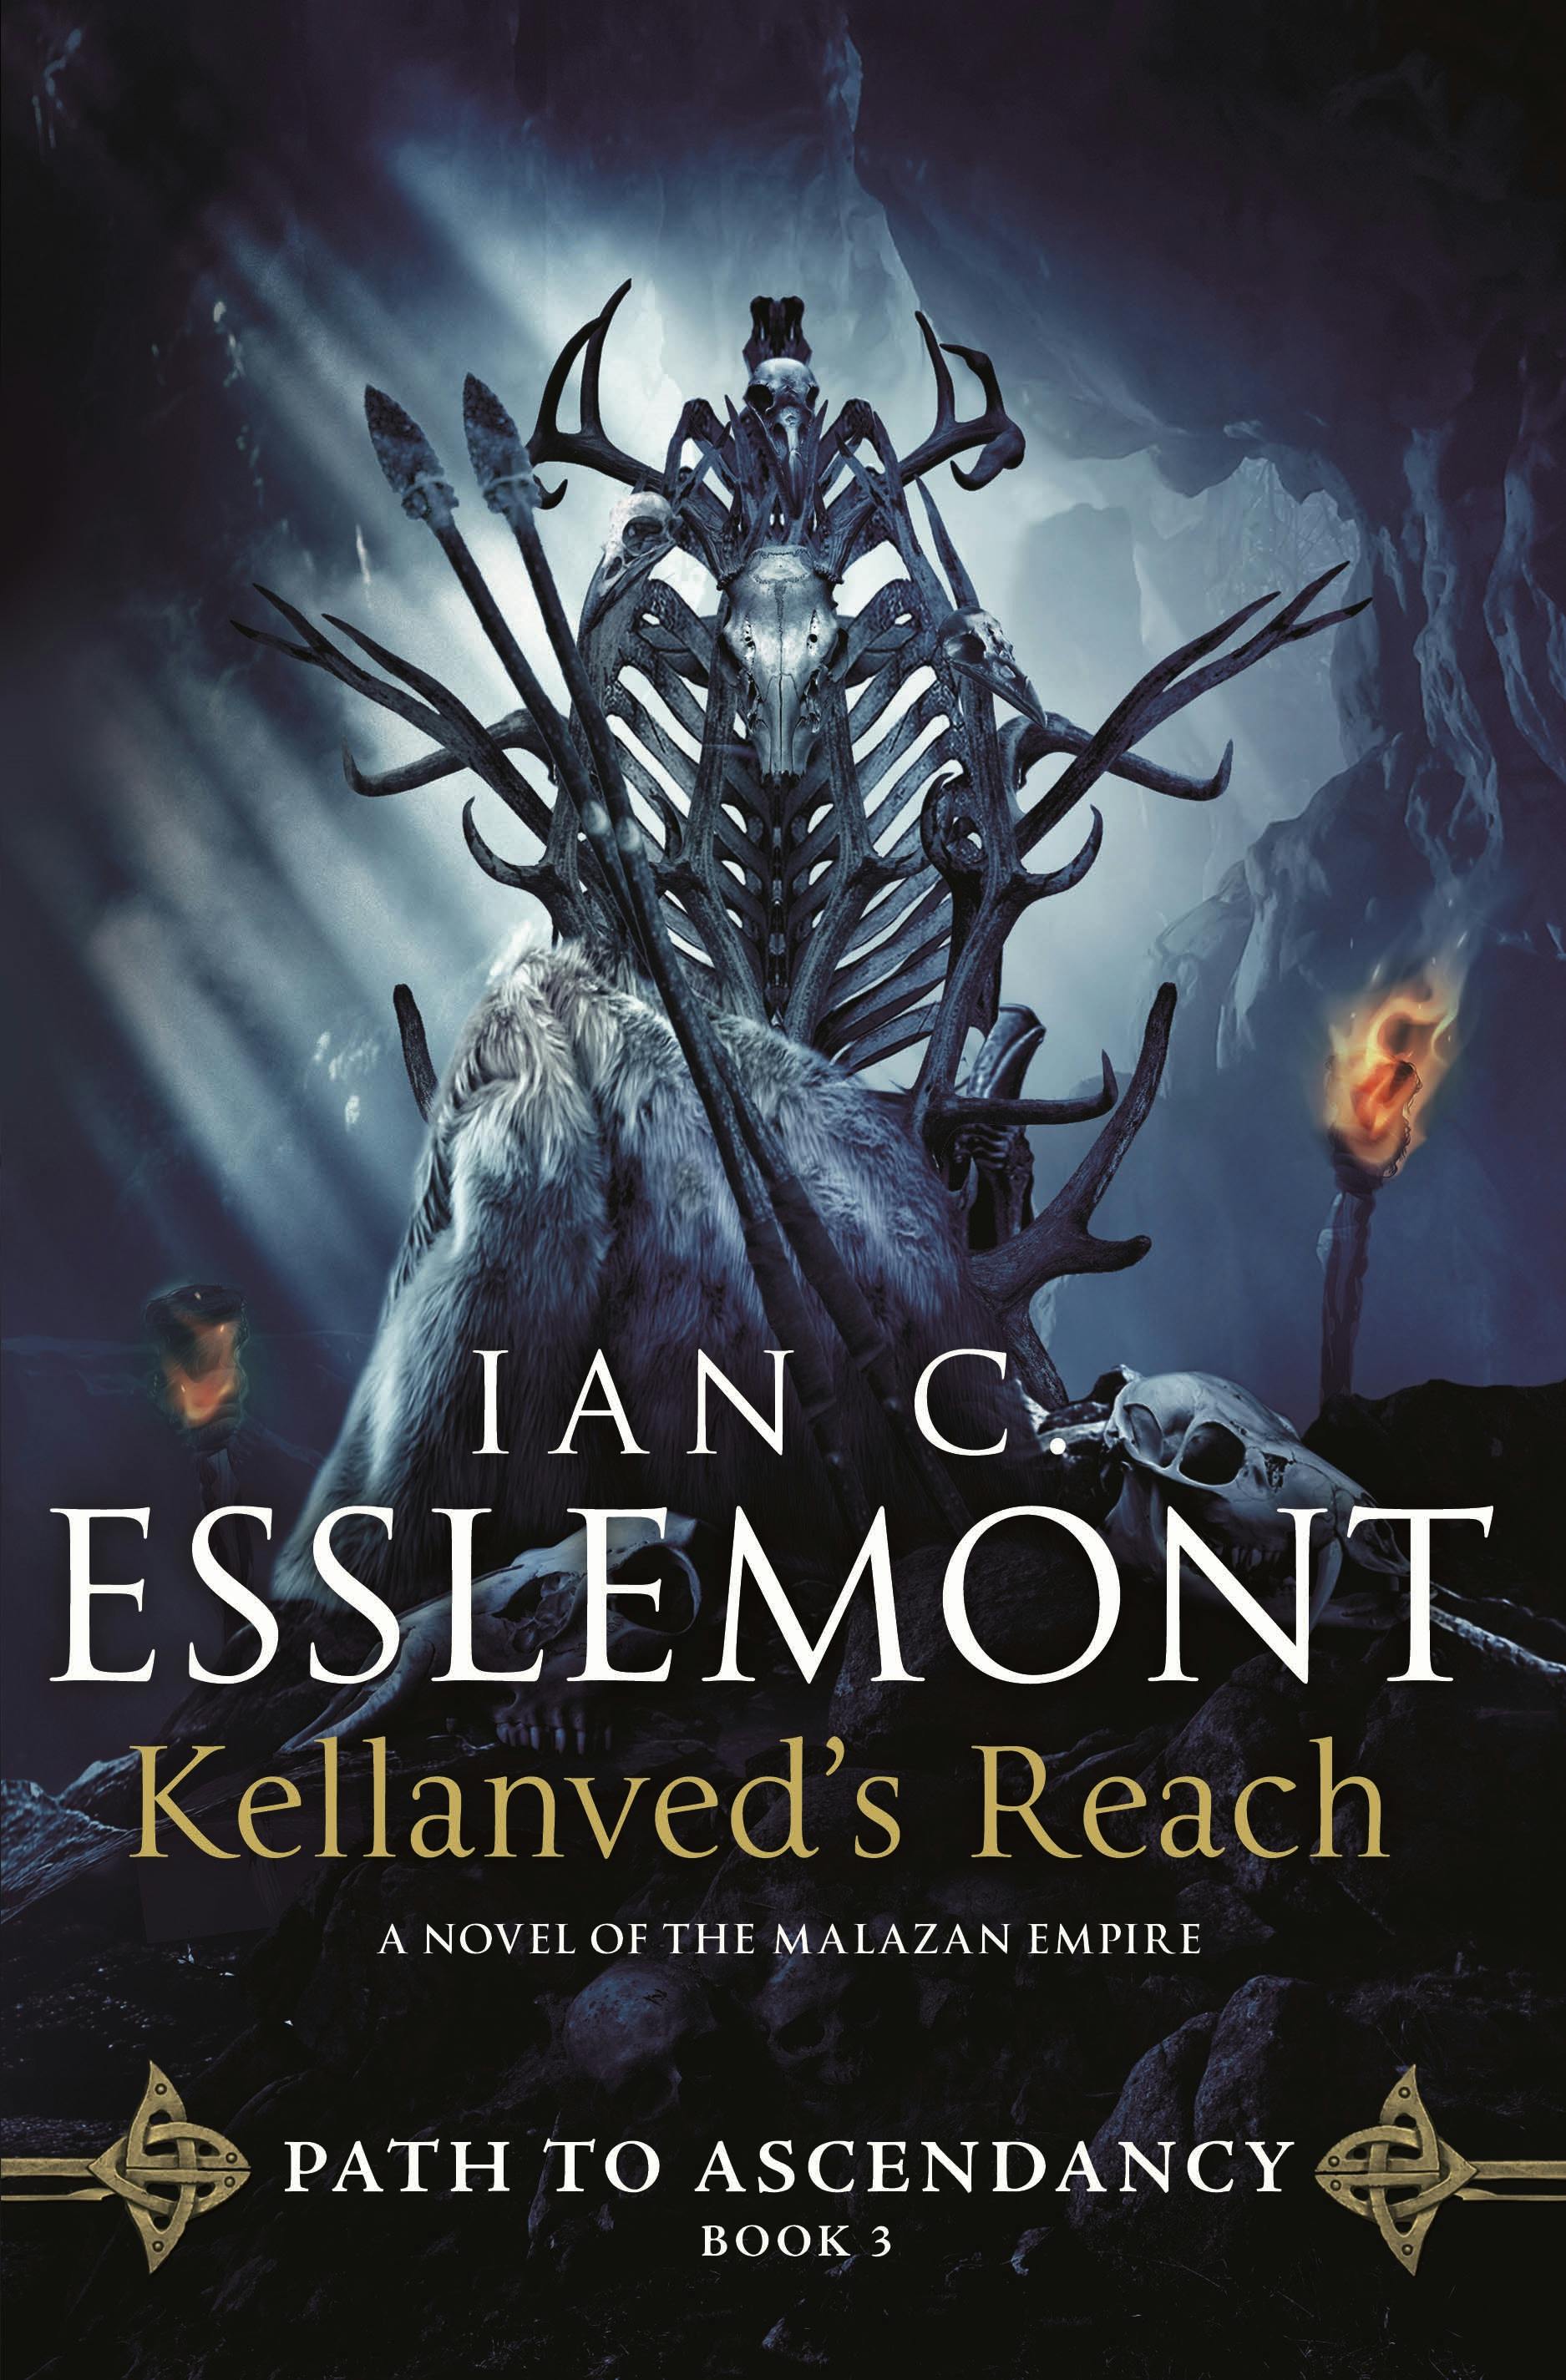 Cover for the book titled as: Kellanved's Reach